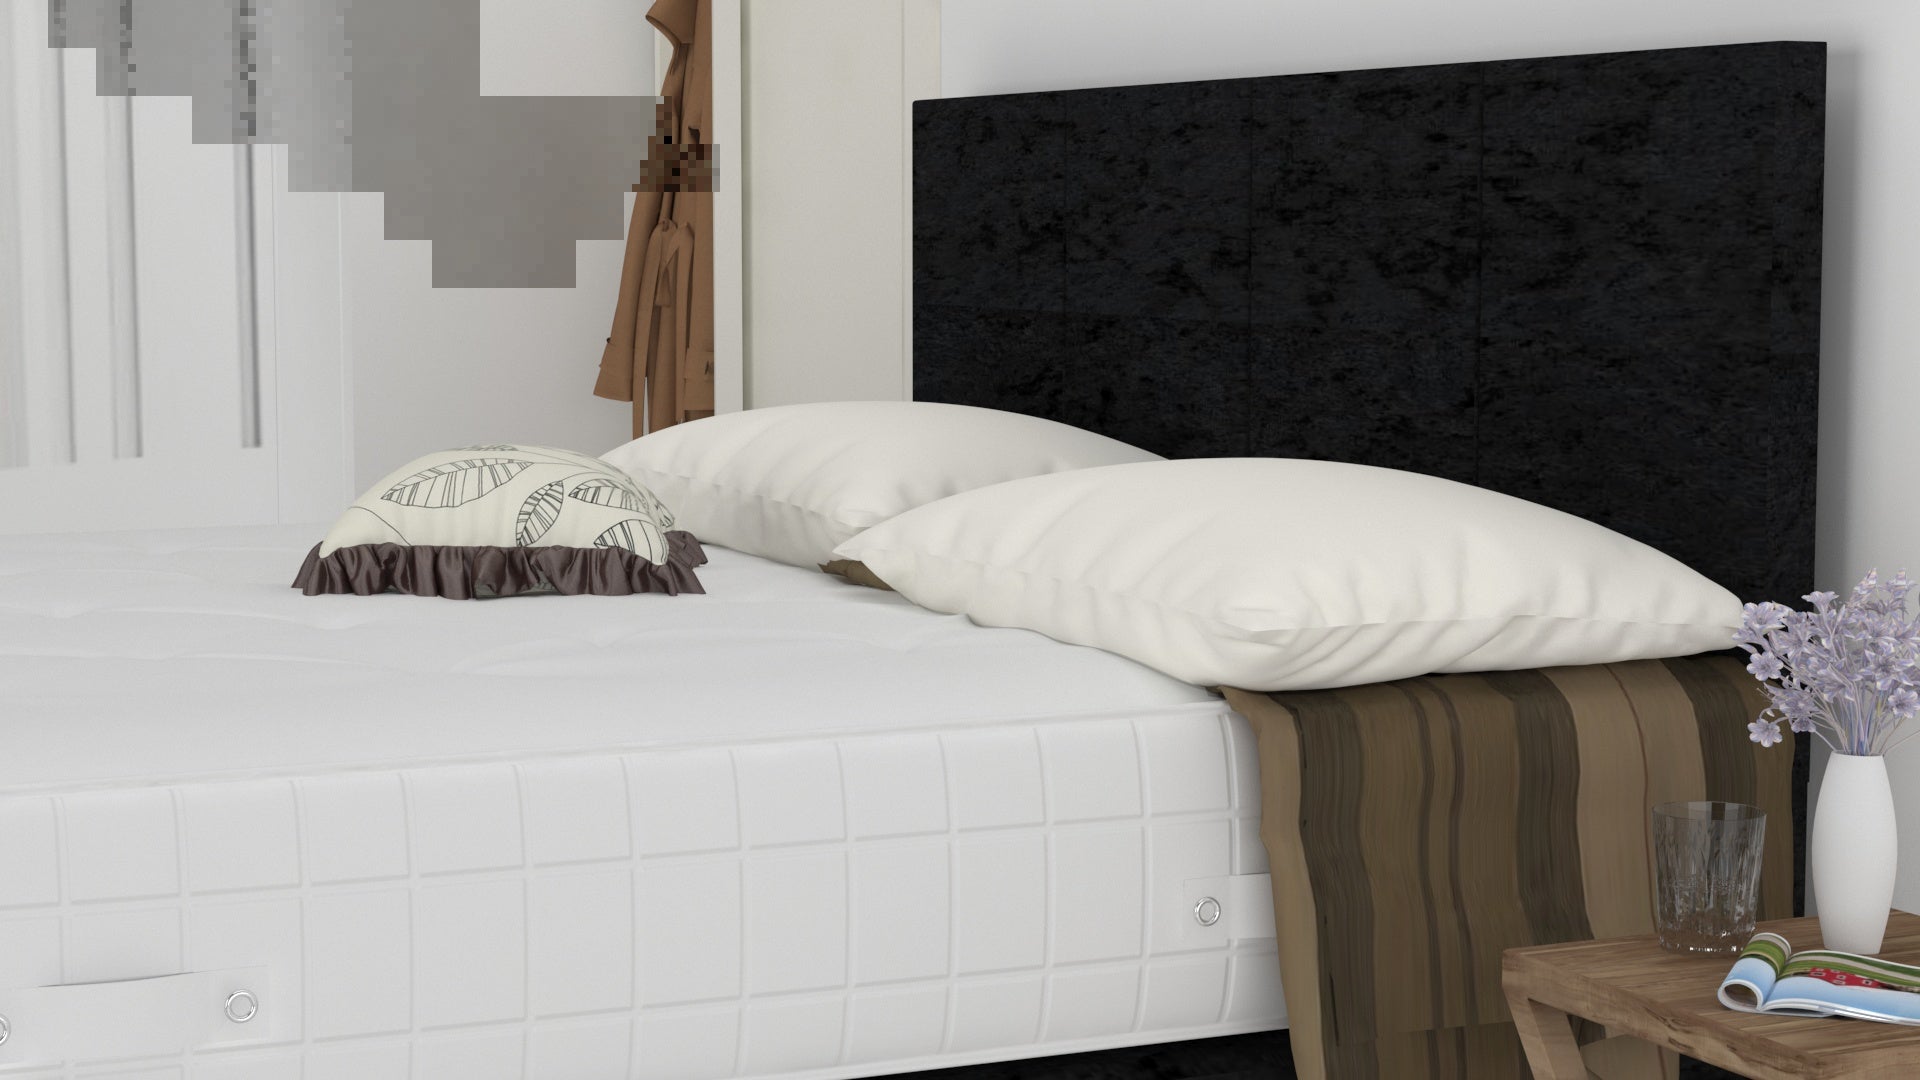 Black Crushed 4 Feet Divan Bed Set With 4 Panel Headboard (Included Feet) And Free Tinsel Top Mattress